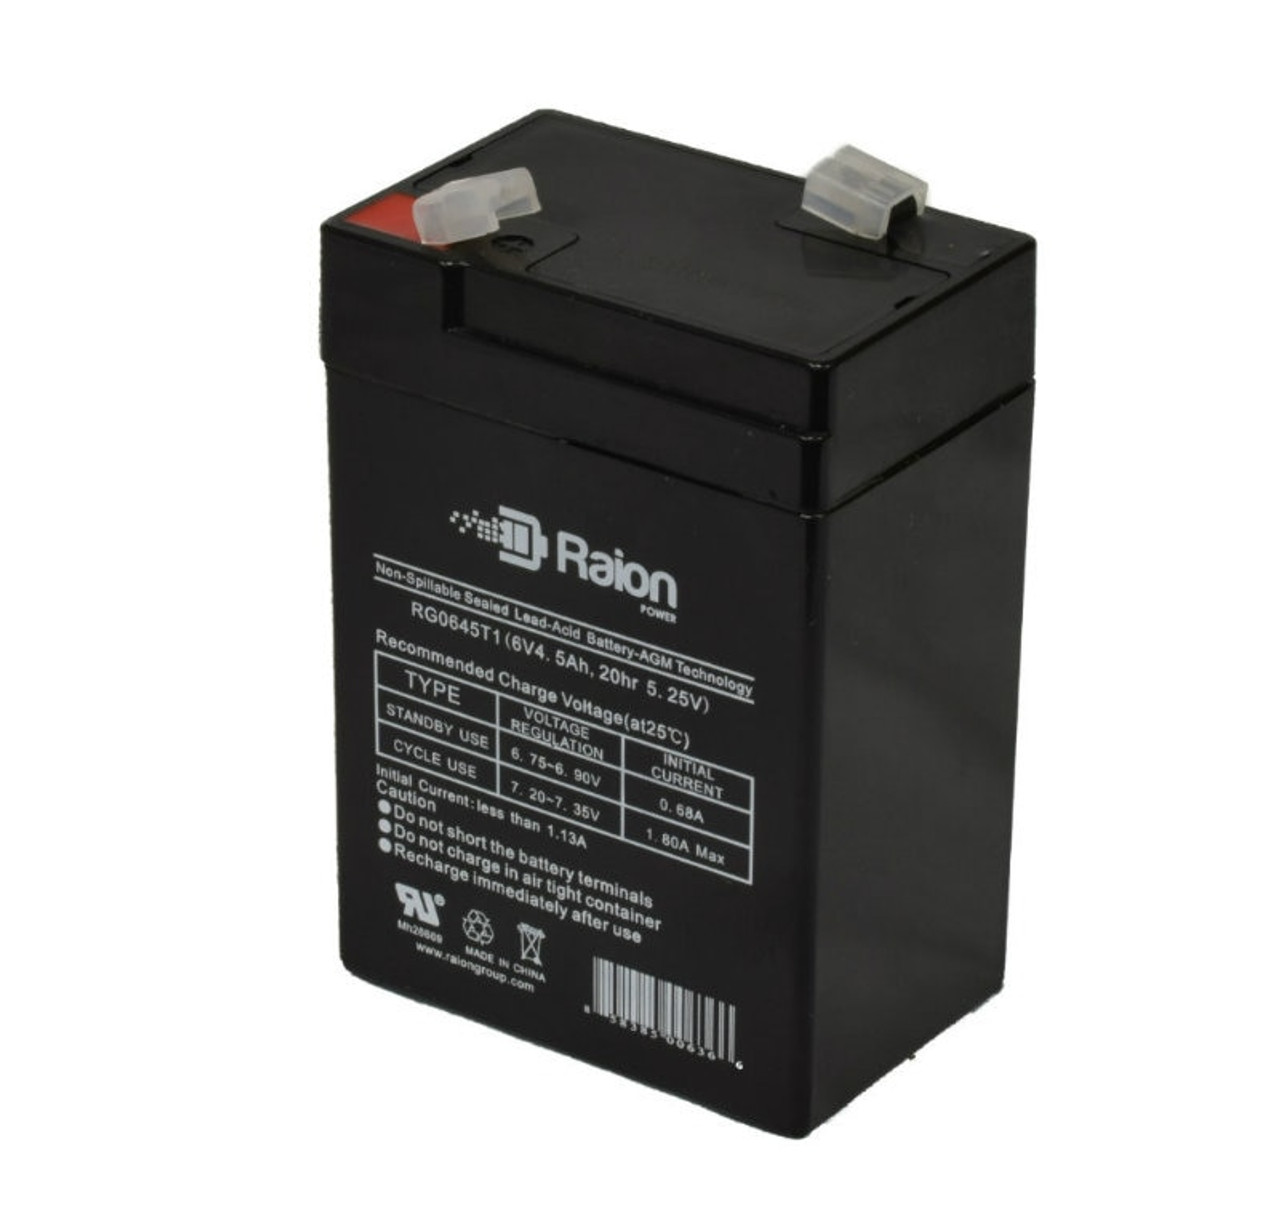 Raion Power RG0645T1 6V 4.5Ah Sealed Lead Acid Battery With T1 Terminals